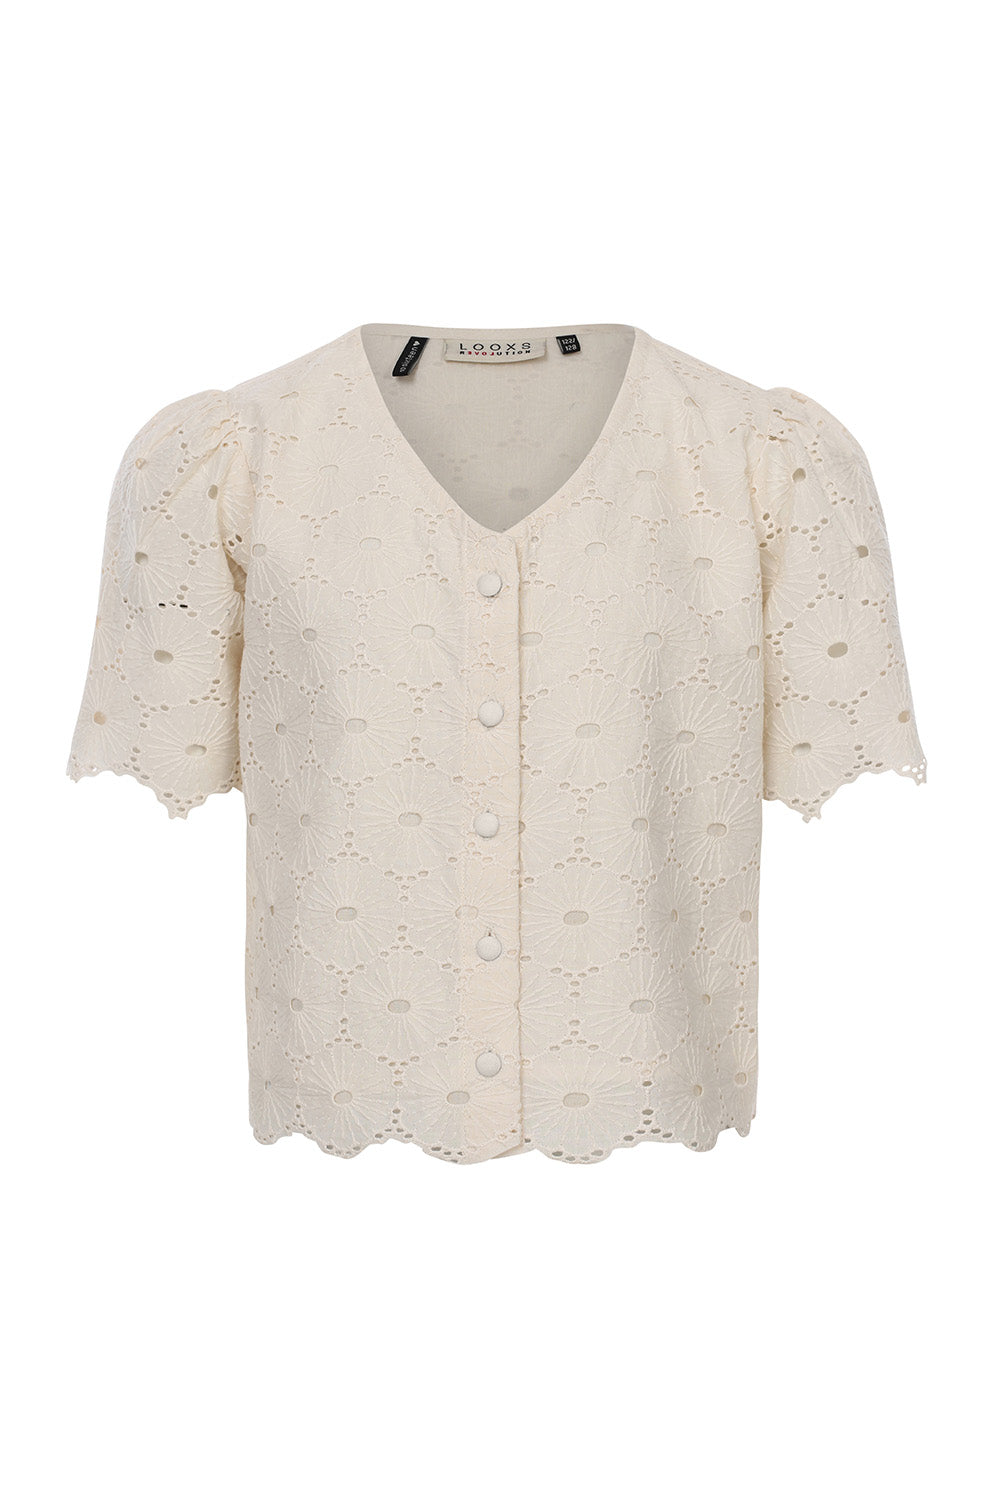 LOOXS 10sixteen Broidery Blouse Top